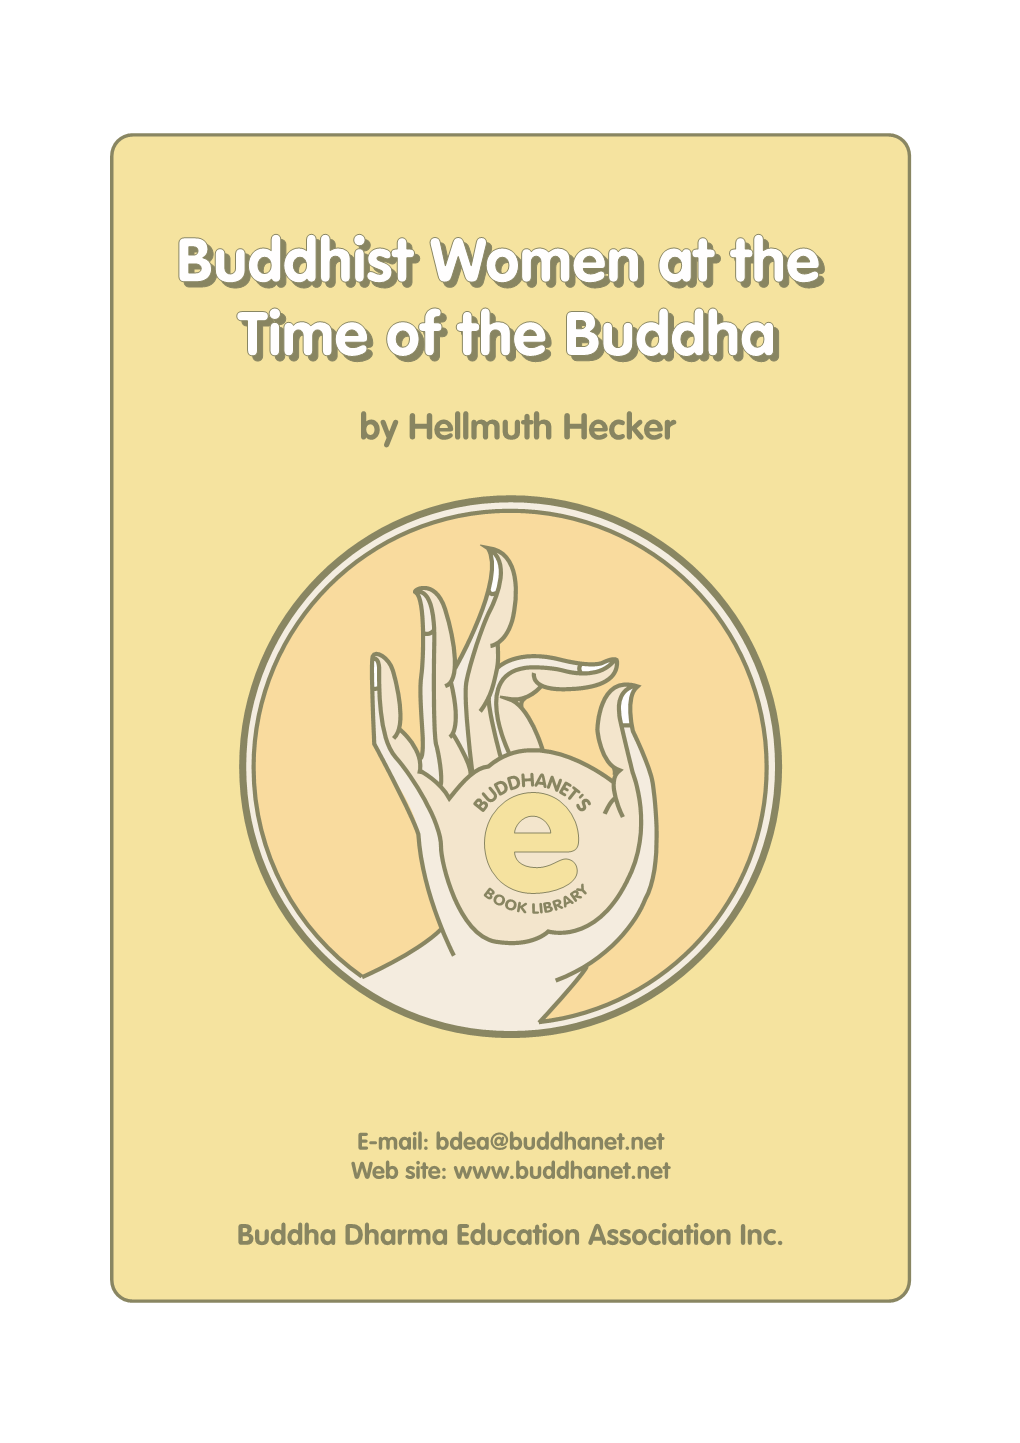 Buddhist Women at the Time of the Buddha by Hellmuth Hecker Translated from the German by Sister Khema